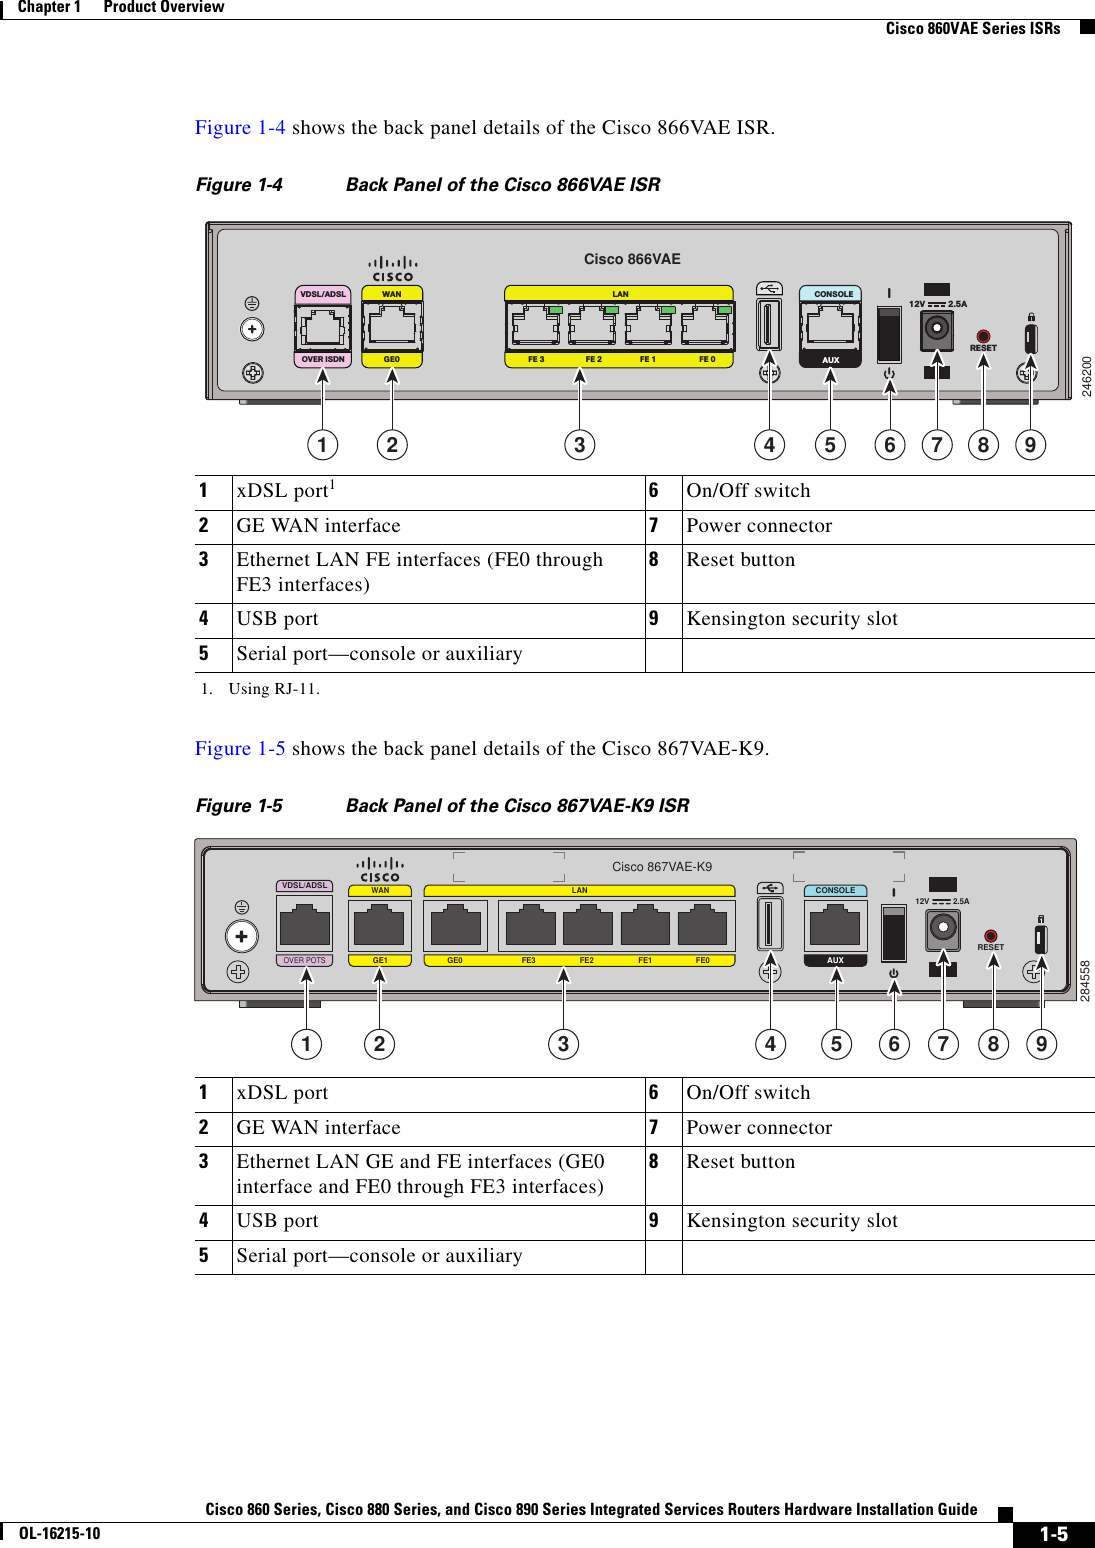  1-5Cisco 860 Series, Cisco 880 Series, and Cisco 890 Series Integrated Services Routers Hardware Installation GuideOL-16215-10Chapter 1      Product Overview  Cisco 860VAE Series ISRsFigure 1-4 shows the back panel details of the Cisco 866VAE ISR.Figure 1-4 Back Panel of the Cisco 866VAE ISRFigure 1-5 shows the back panel details of the Cisco 867VAE-K9.Figure 1-5 Back Panel of the Cisco 867VAE-K9 ISR1xDSL port11. Using RJ-11.6On/Off switch2GE WAN interface 7Power connector3Ethernet LAN FE interfaces (FE0 through FE3 interfaces)8Reset button4USB port 9Kensington security slot5Serial port—console or auxiliary246200CONSOLEAUXFE 2 FE 1 FE 0FE 3OVER ISDNLANWANGE0VDSL/ADSL12V           2.5ARESETCisco 866VAE1 2 3 4 7 8 95 61xDSL port 6On/Off switch2GE WAN interface 7Power connector3Ethernet LAN GE and FE interfaces (GE0 interface and FE0 through FE3 interfaces)8Reset button4USB port 9Kensington security slot5Serial port—console or auxiliary284558CONSOLEAUXOVER POTSWAN LANGE1 GE0 FE3 FE2 FE1 FE0VDSL/ADSL12V           2.5ARESETCisco 867VAE-K91 2 3 4 7 8 95 6